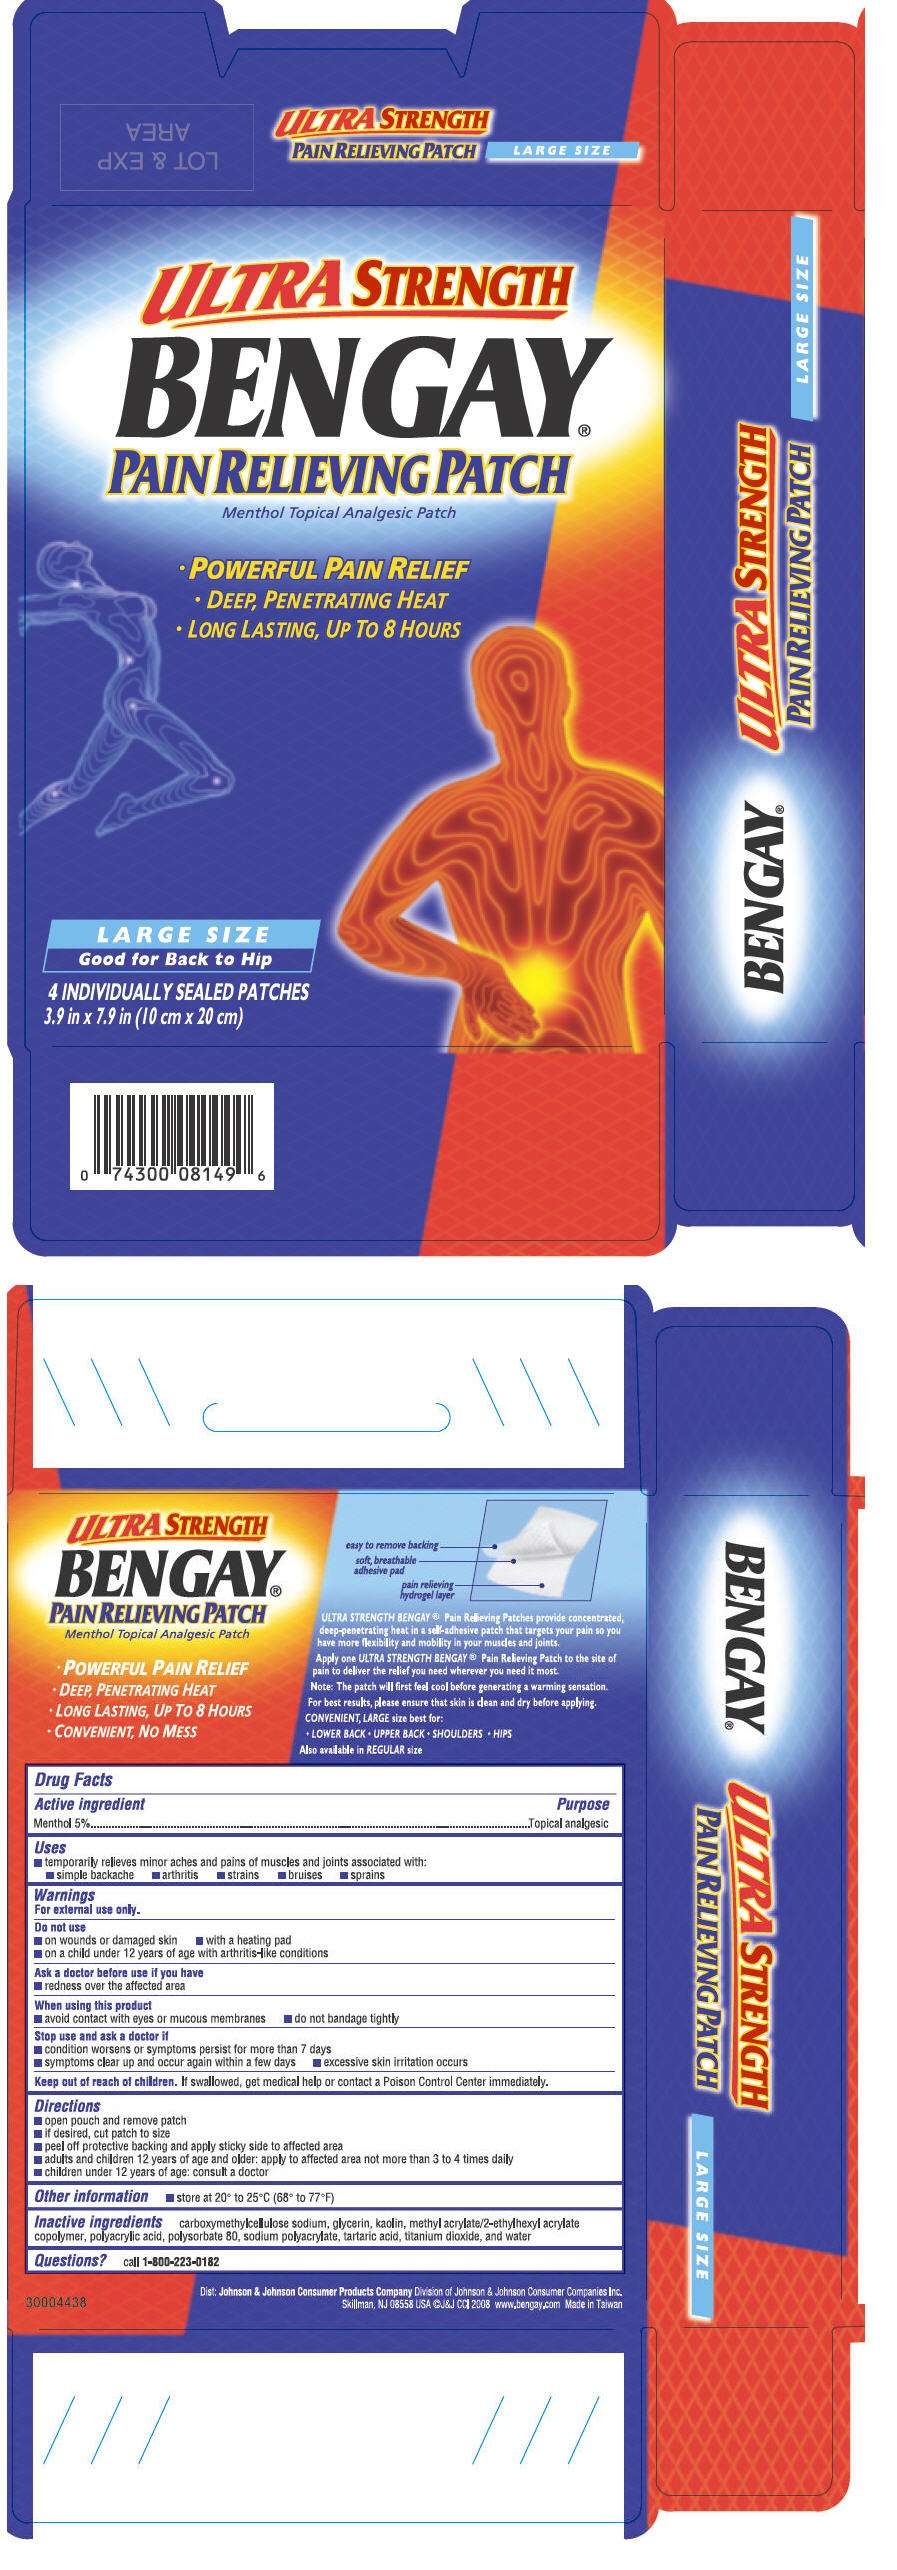 Bengay Ultra Strength Pain Relieving